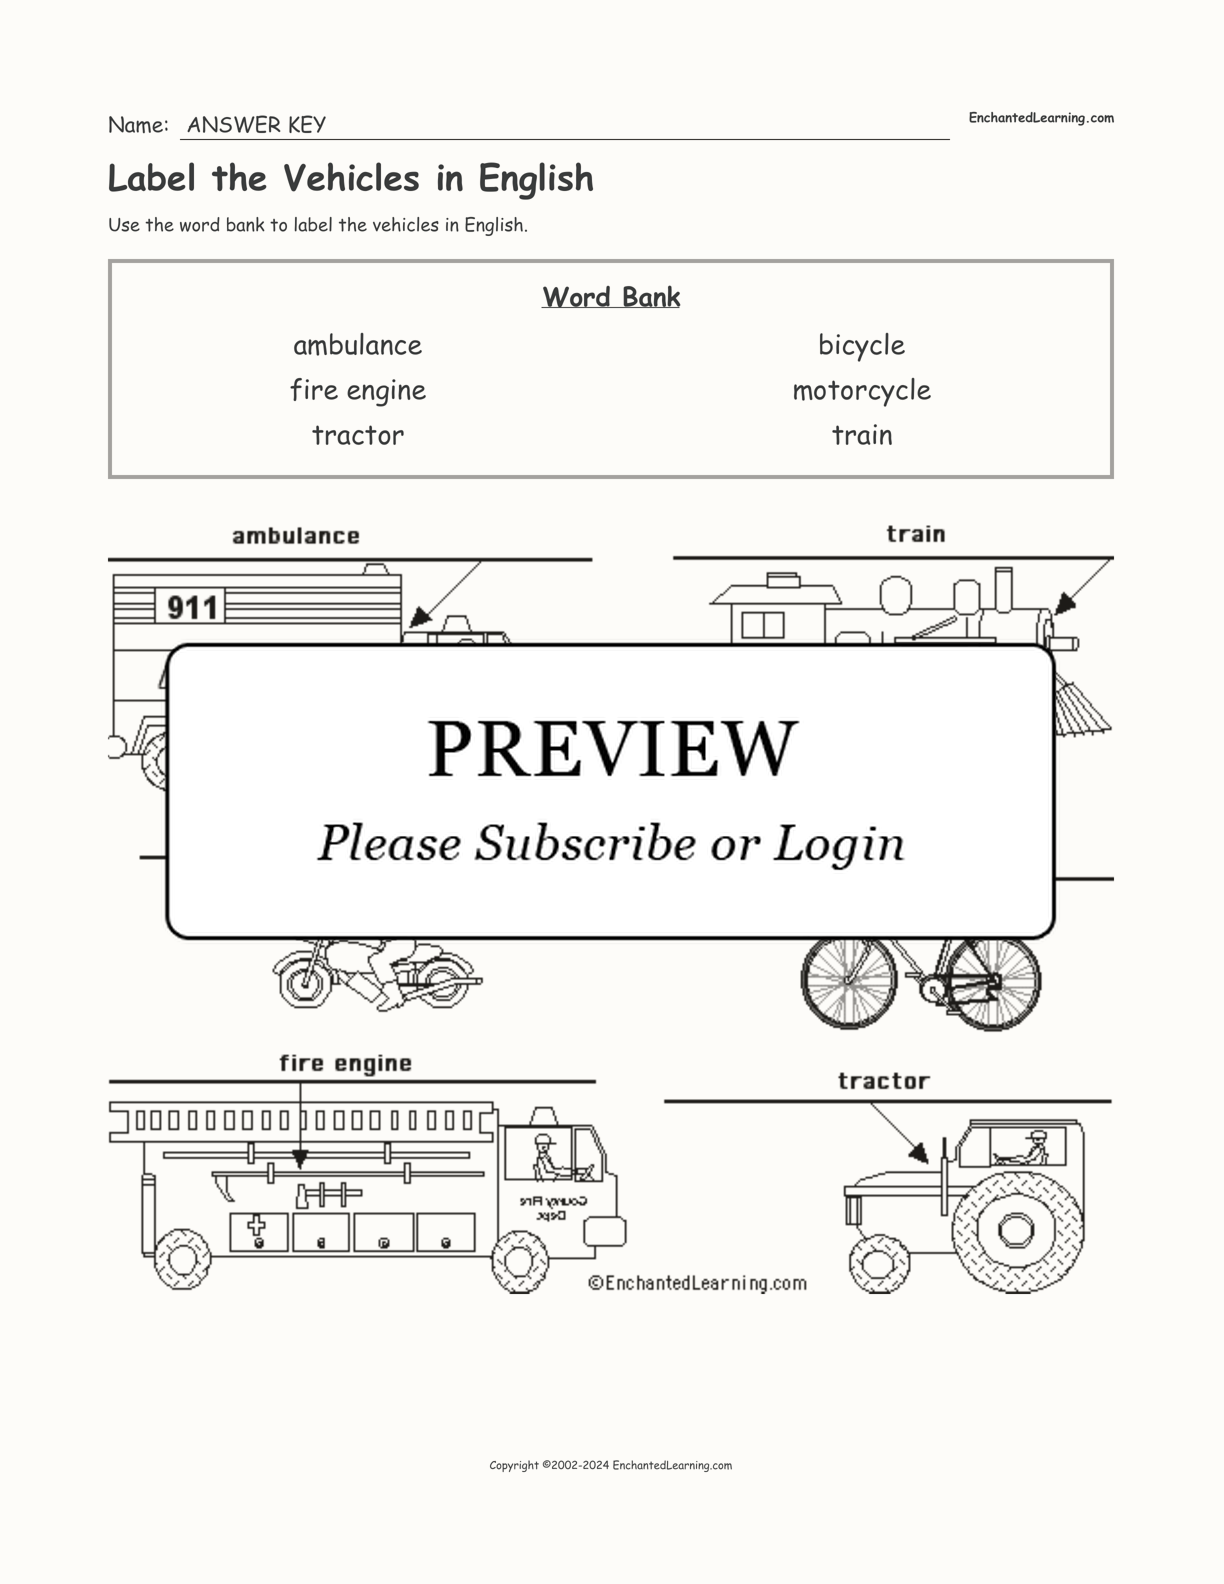 Label the Vehicles in English interactive worksheet page 2